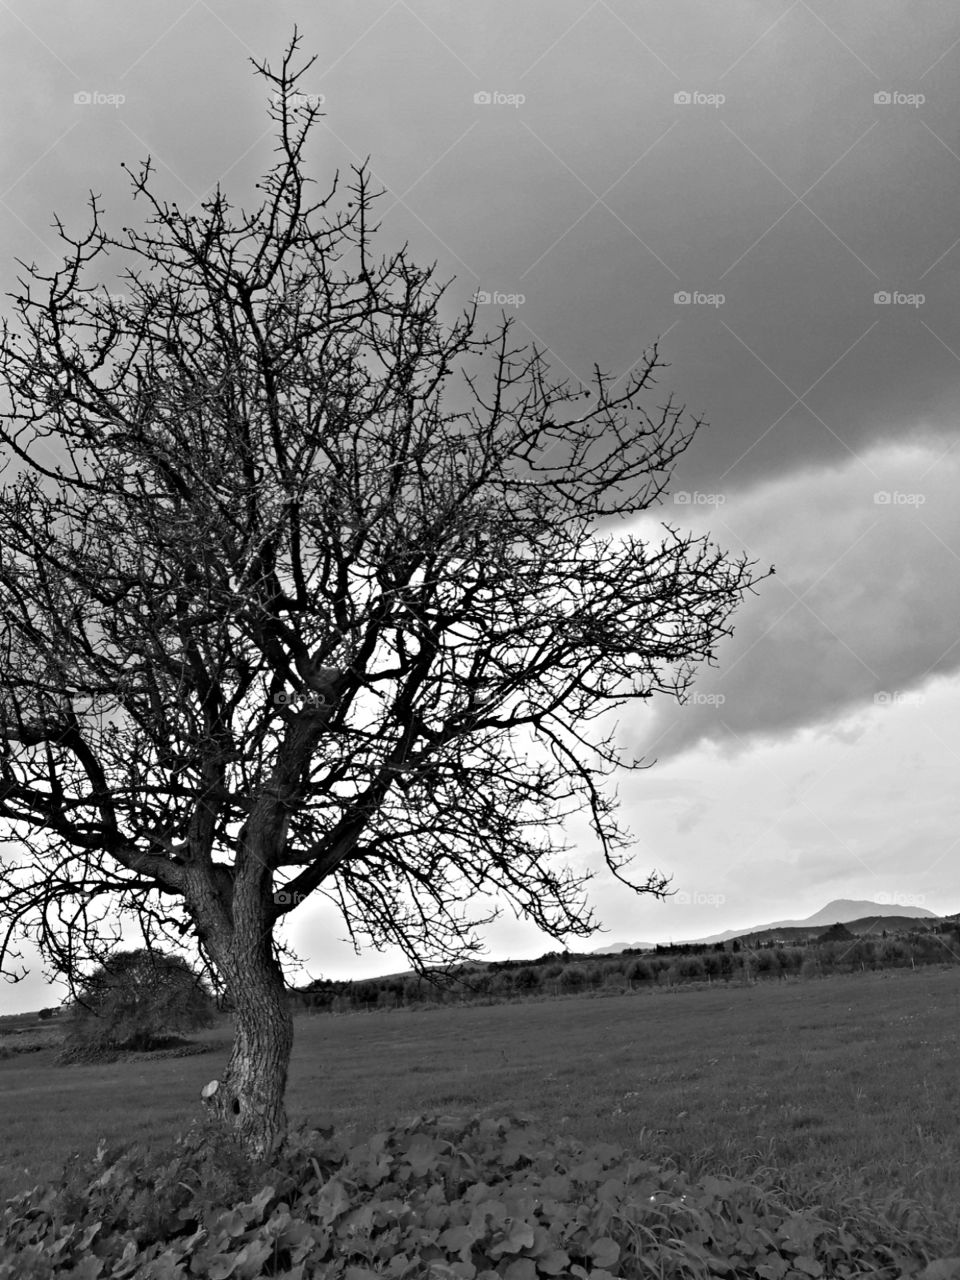 black wgite picture with nature death tree